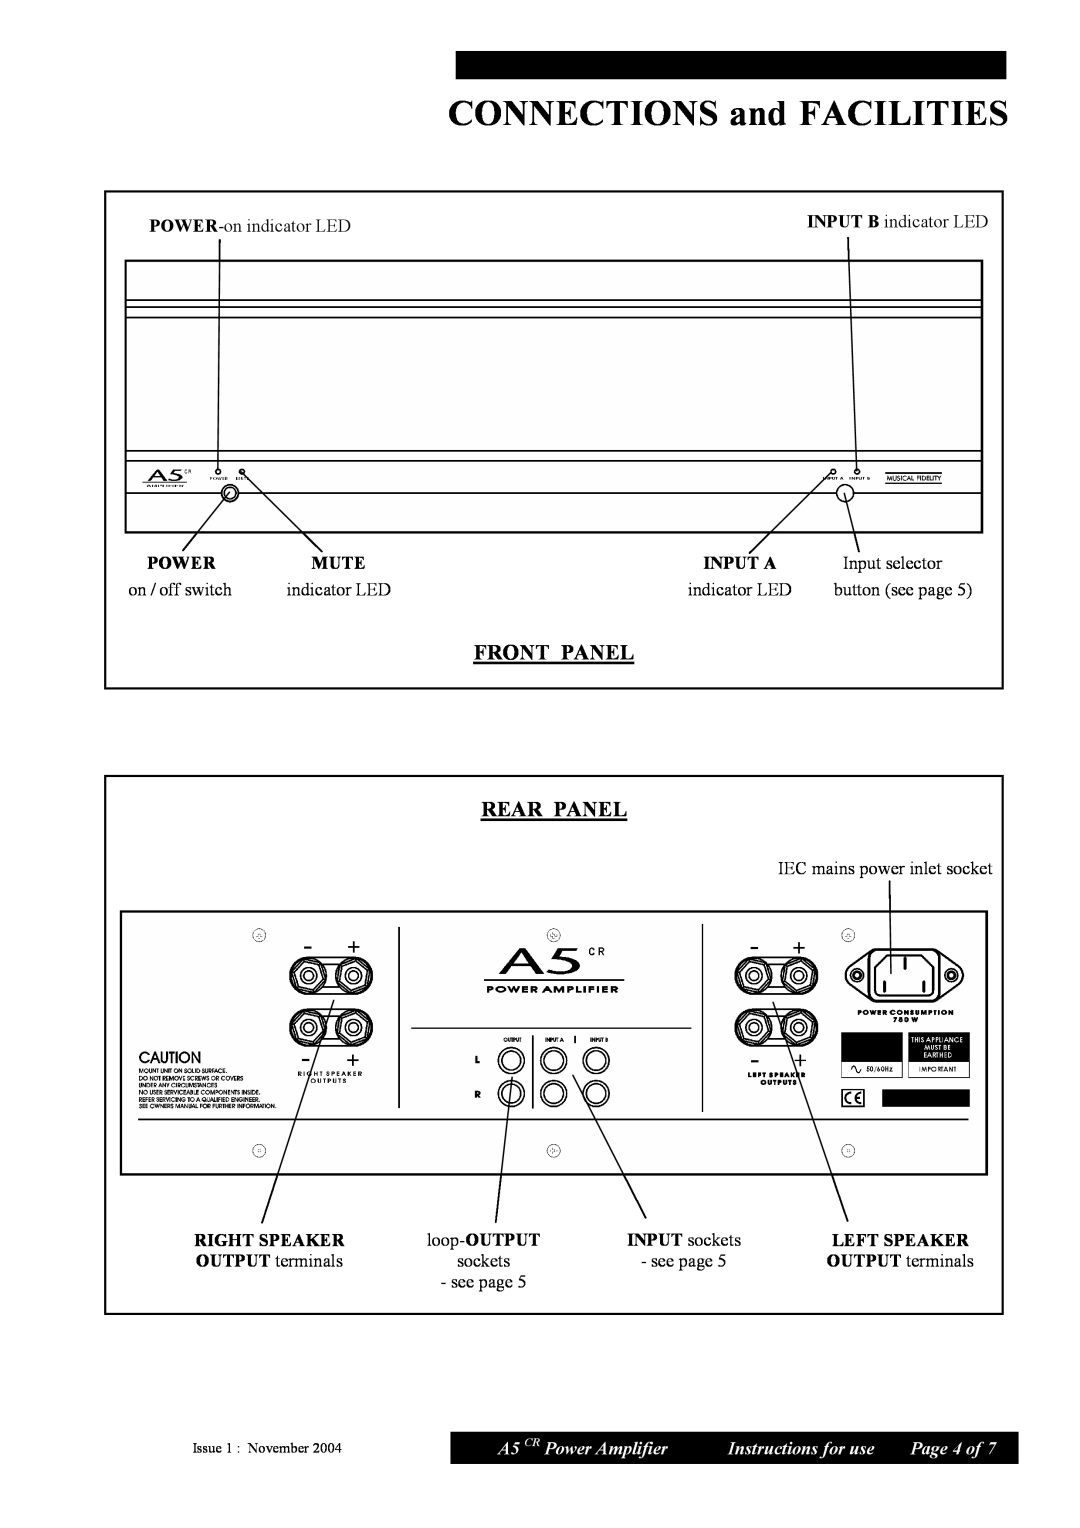 Musical Fidelity manual CONNECTIONS and FACILITIES, Front Panel Rear Panel, A5 CR Power Amplifier, Instructions for use 